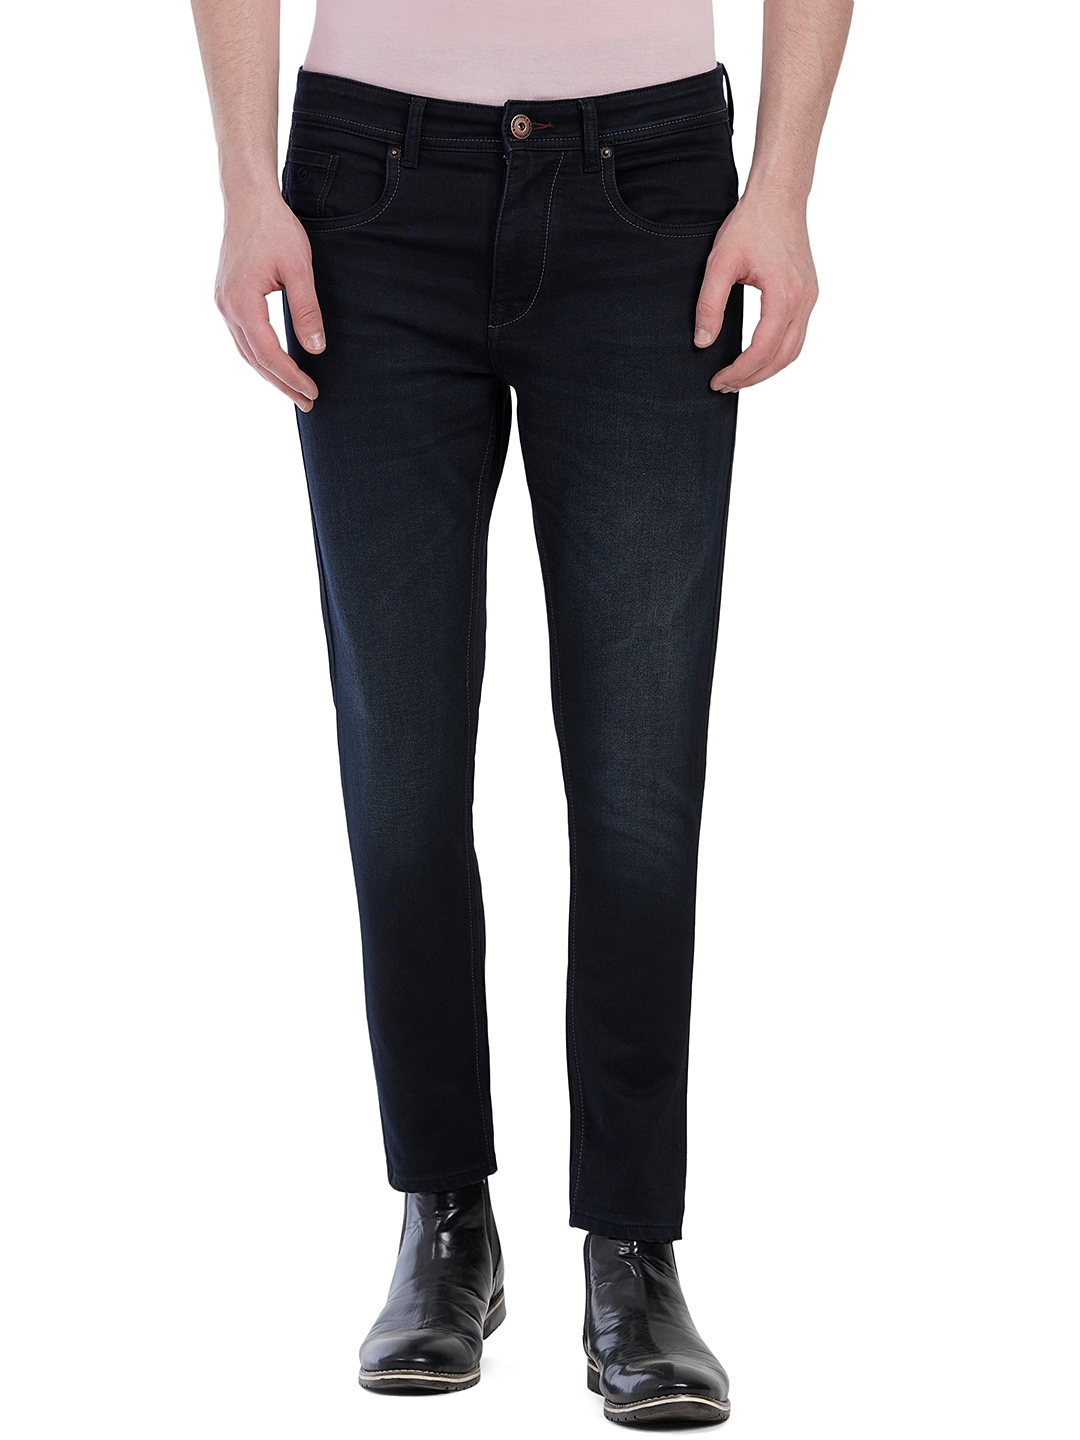 Greenfibre | Night Grey & Blue Solid Slim Fit Jeans | Greenfibre